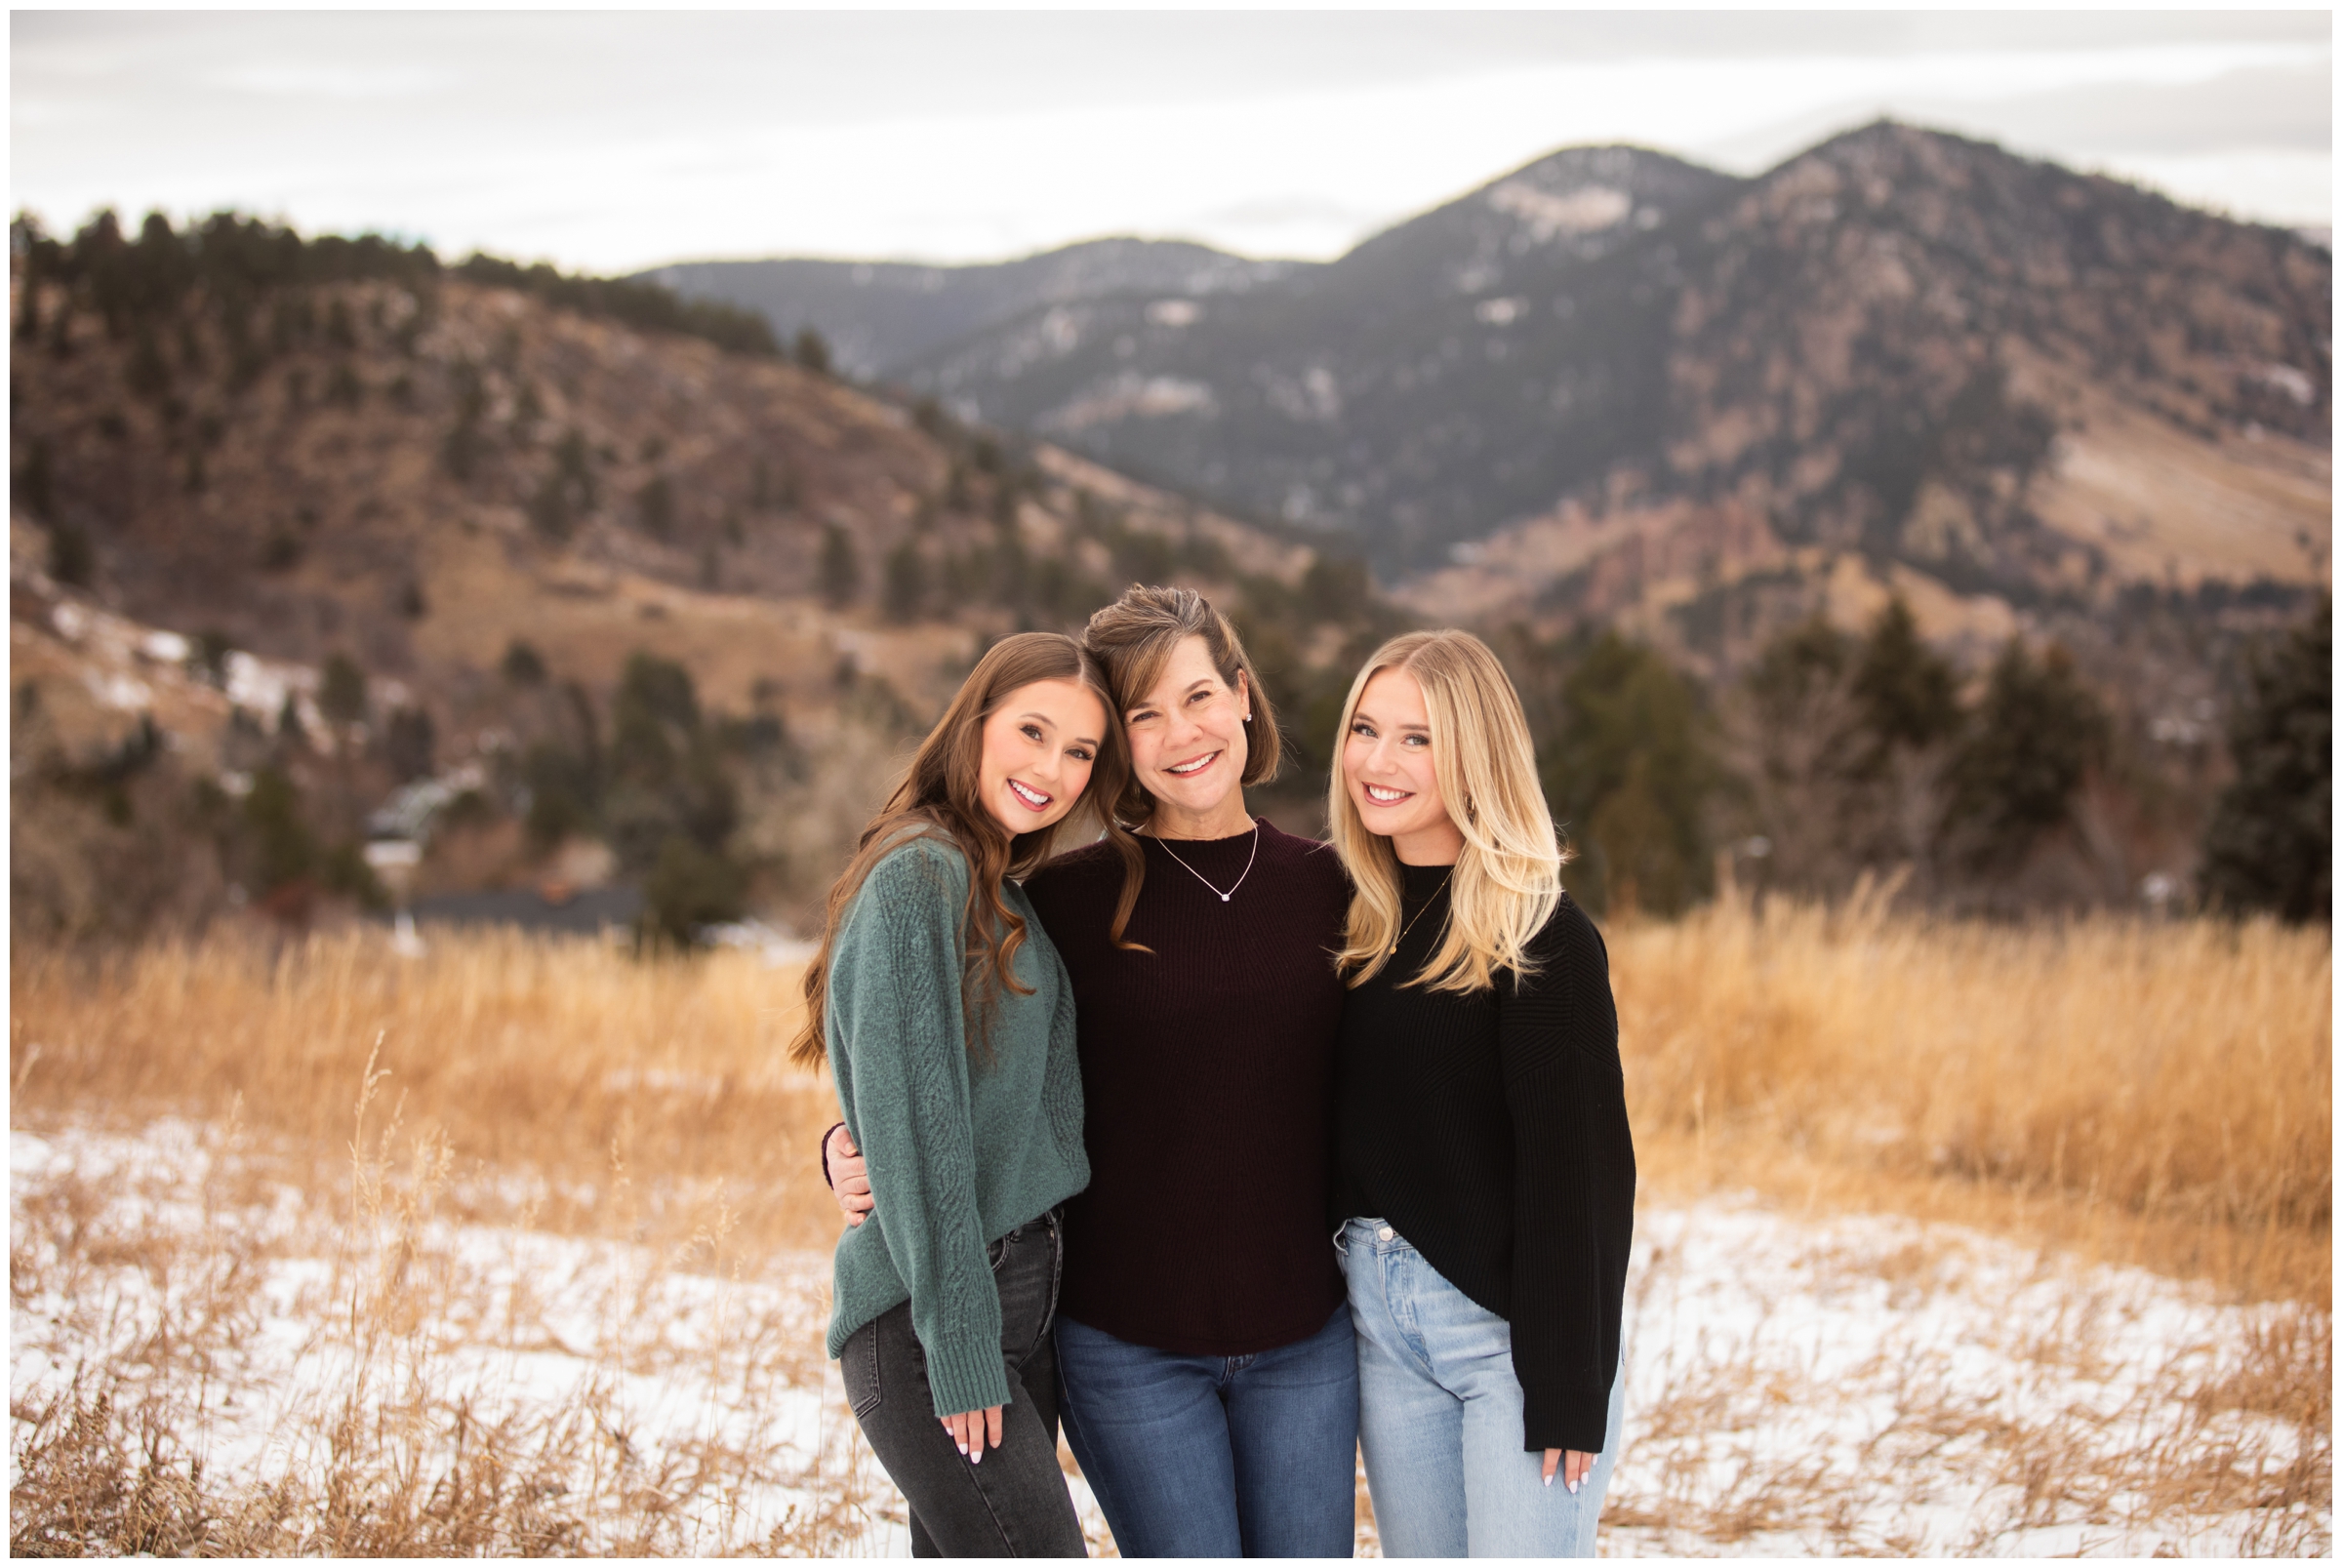 Colorado mountain photography session in the snow at Chautauqua Park